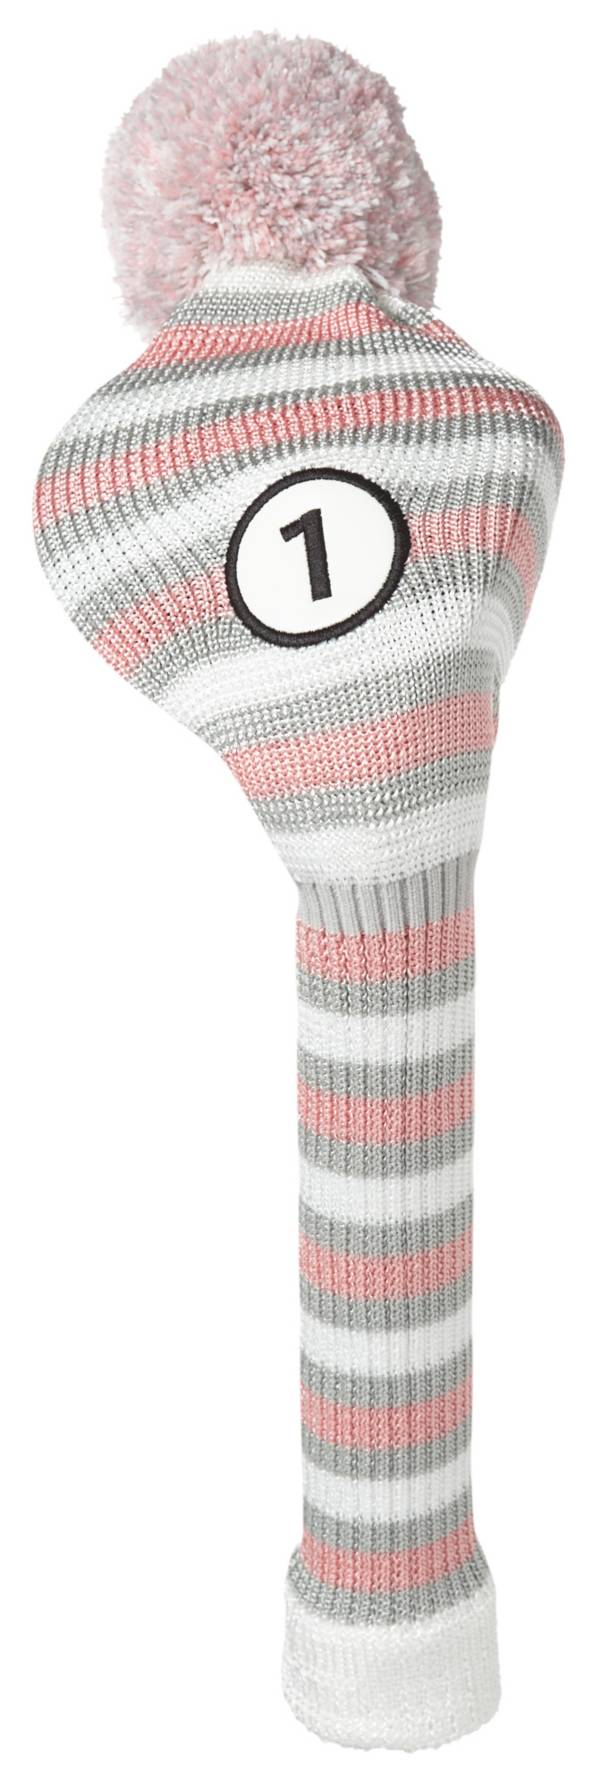 Maxfli Women's Knit Driver Headcover product image